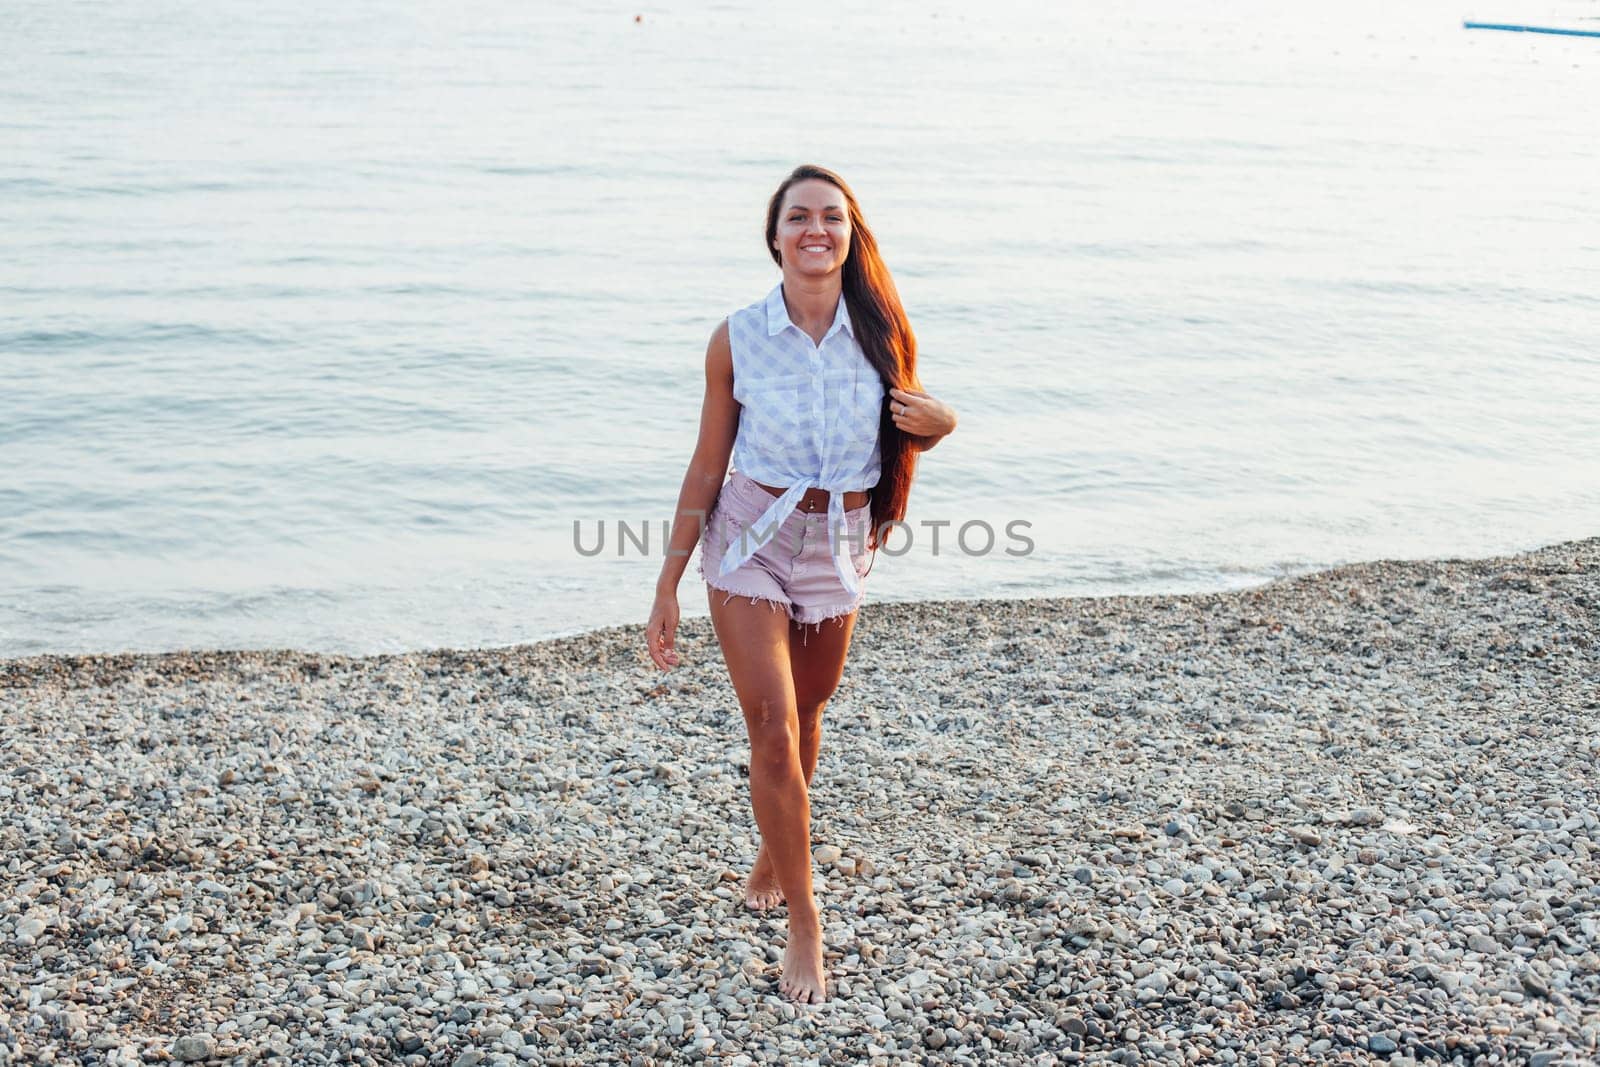 Tanned woman with long hair walks on beach by the sea by Simakov